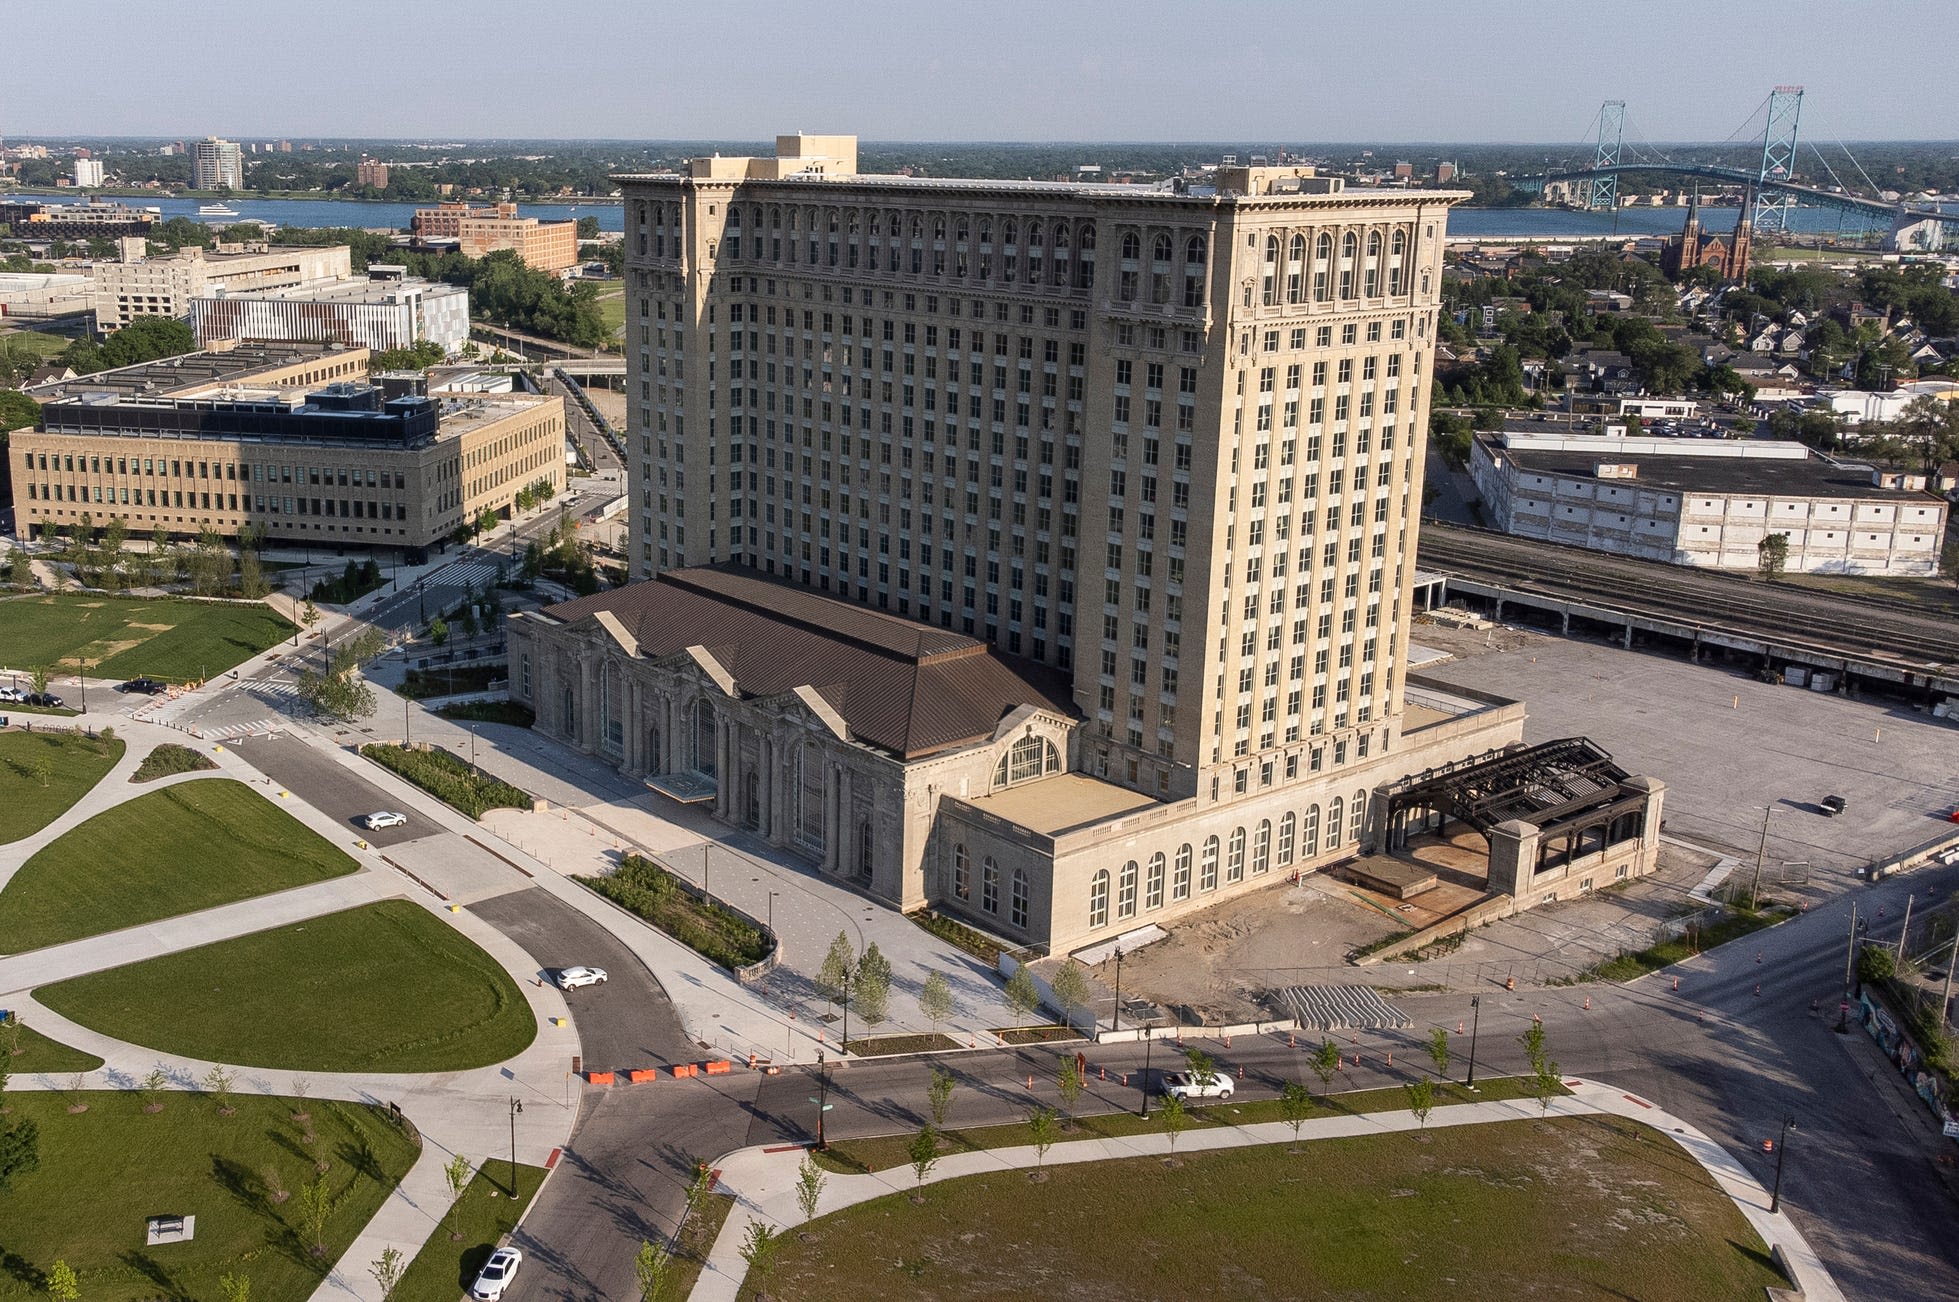 Michigan Central Station reopening: Everything you need to know about concert, renovation